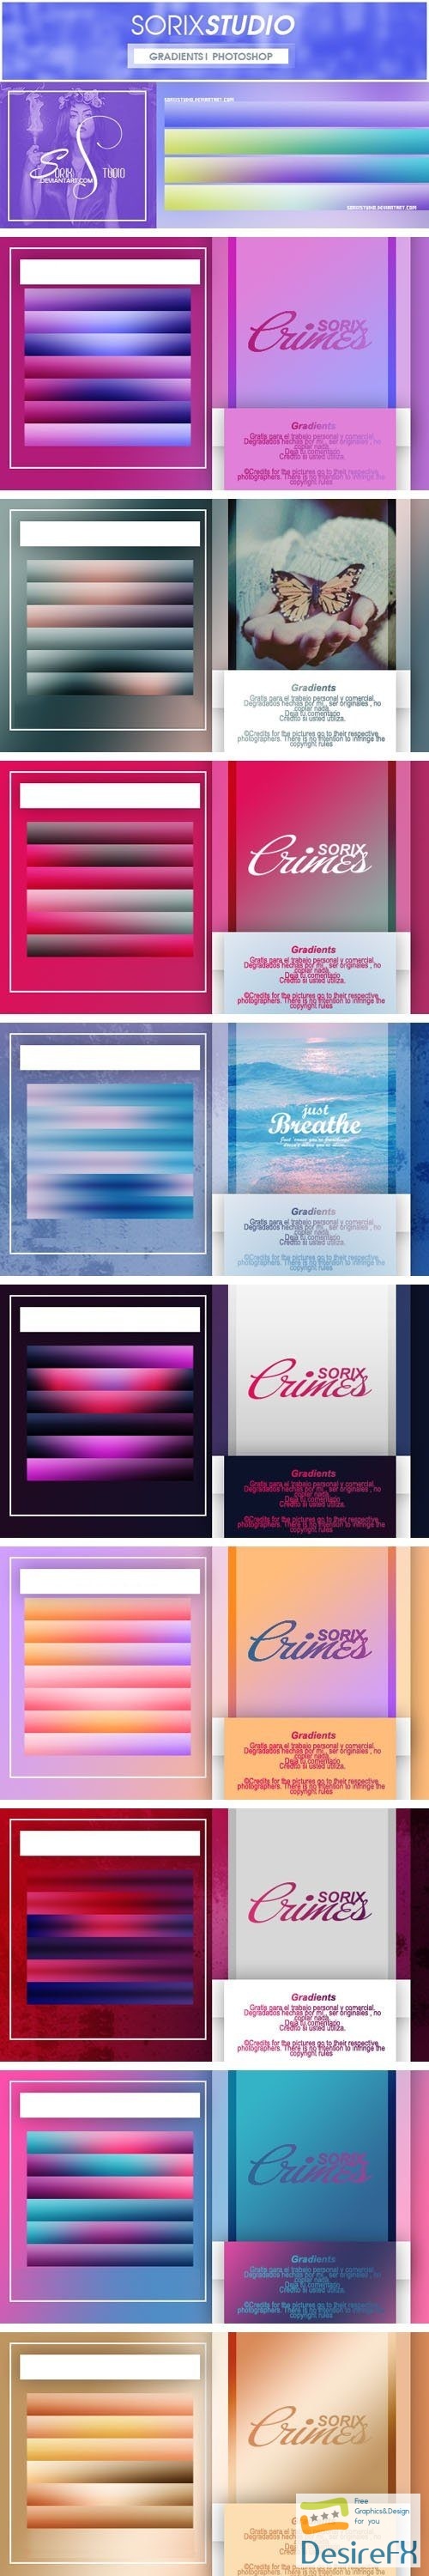 60+ Awesome Gradients Pack for Photoshop